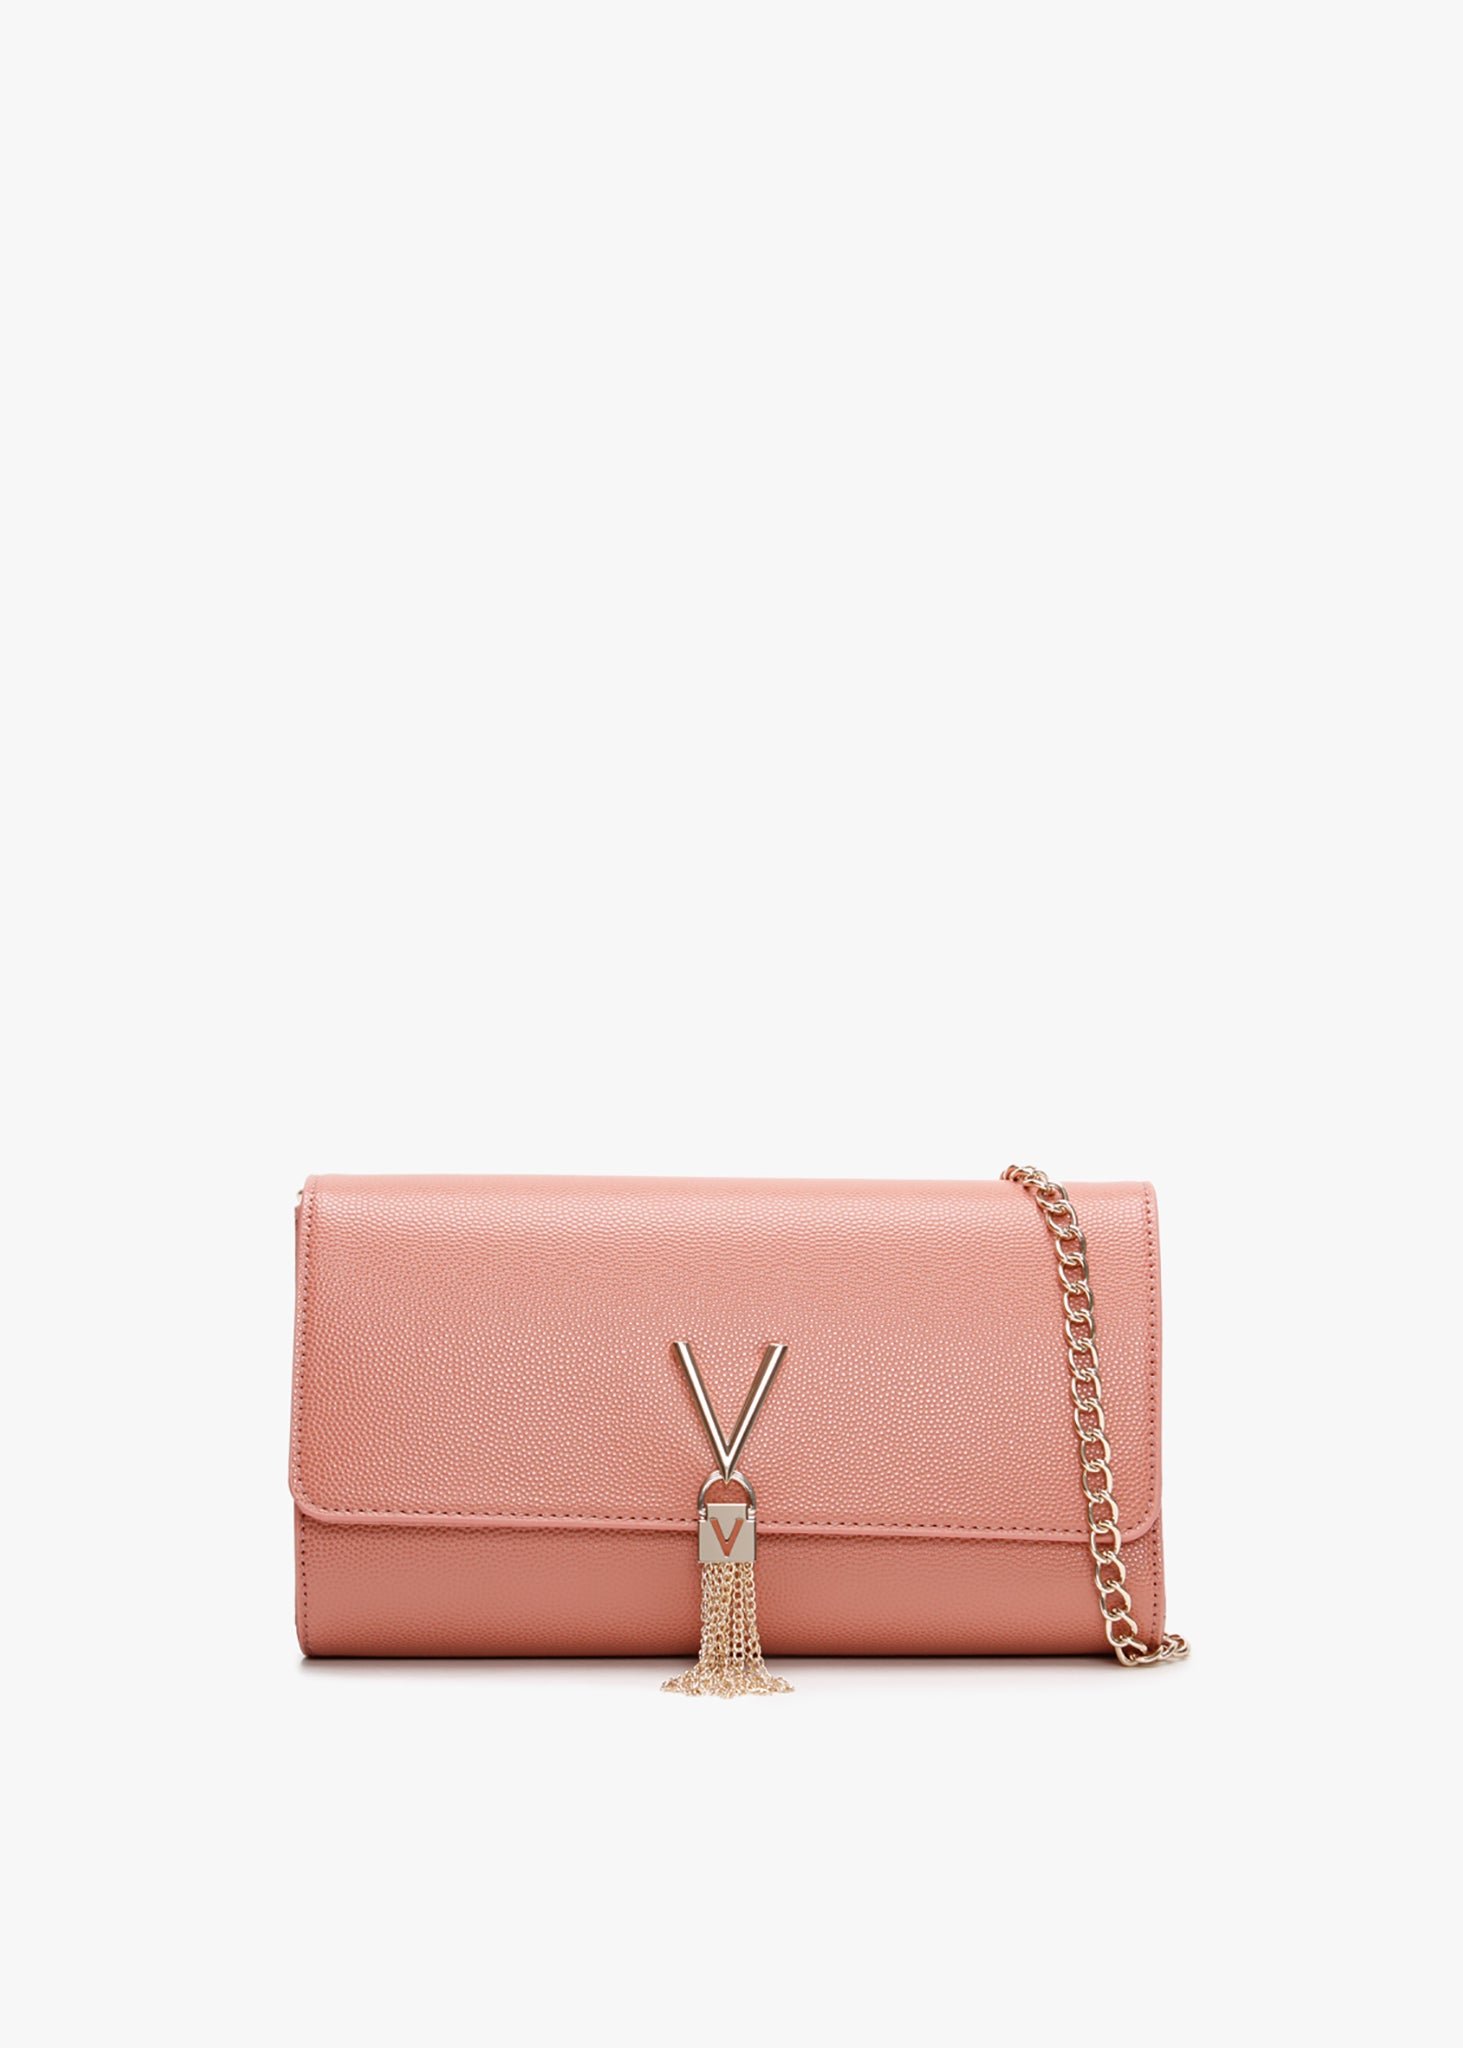 Valentino Bags Womens Divina Fold Over Clutch Bag With Chain Strap In Rosa Antico